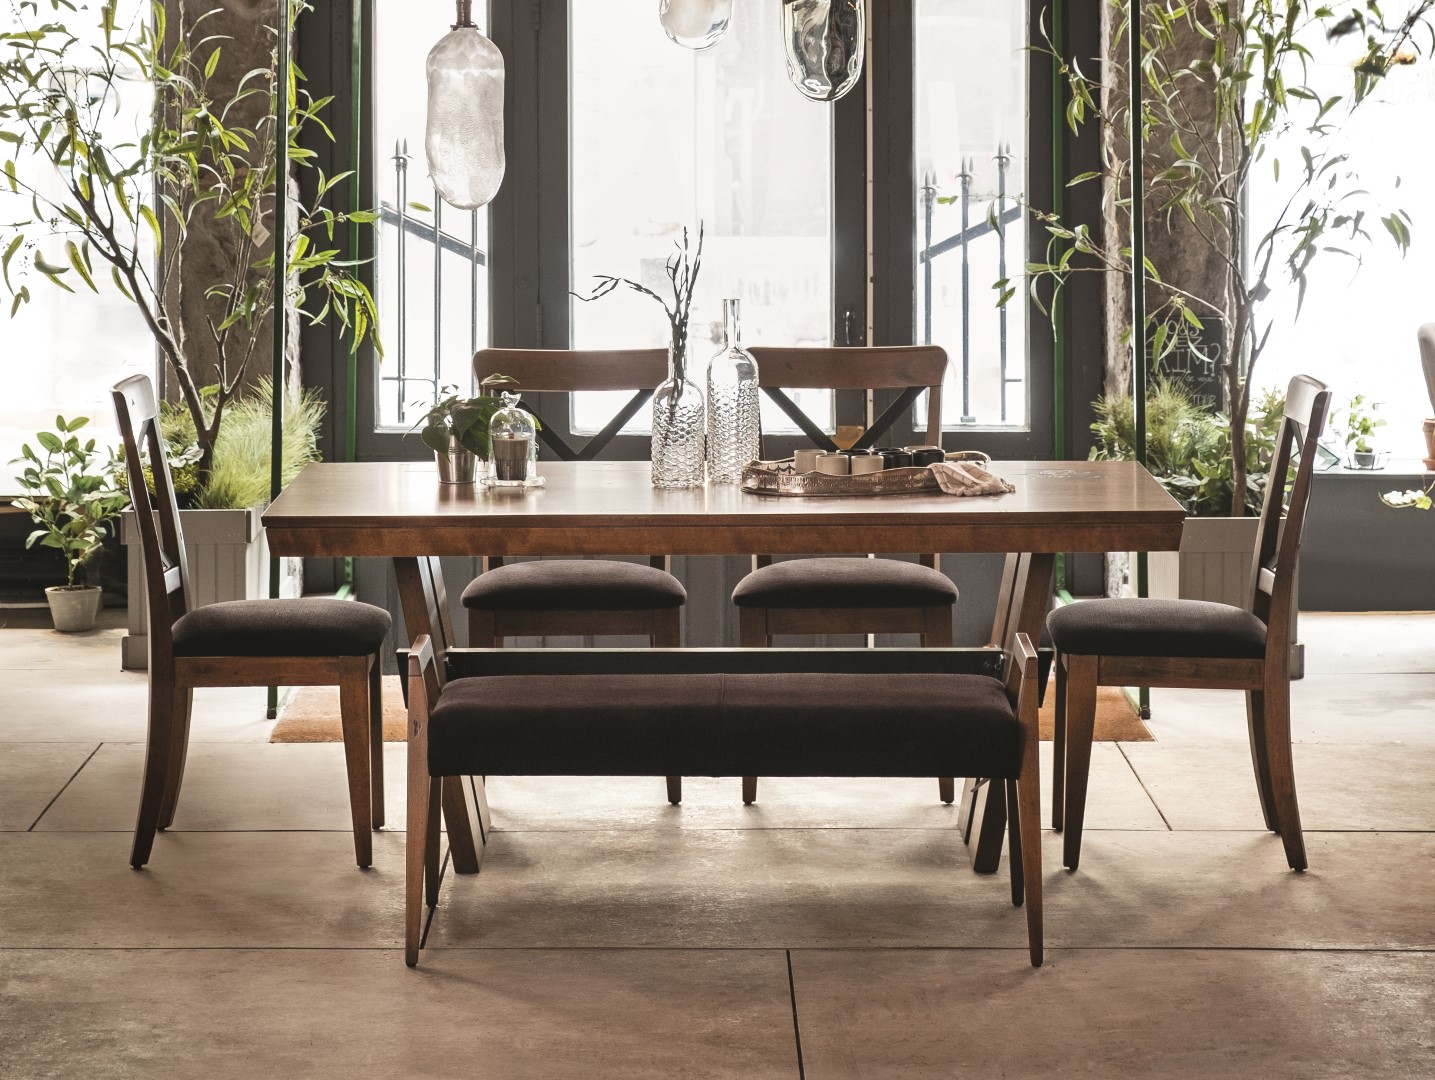 Canadel Eastside Dining Room Collection